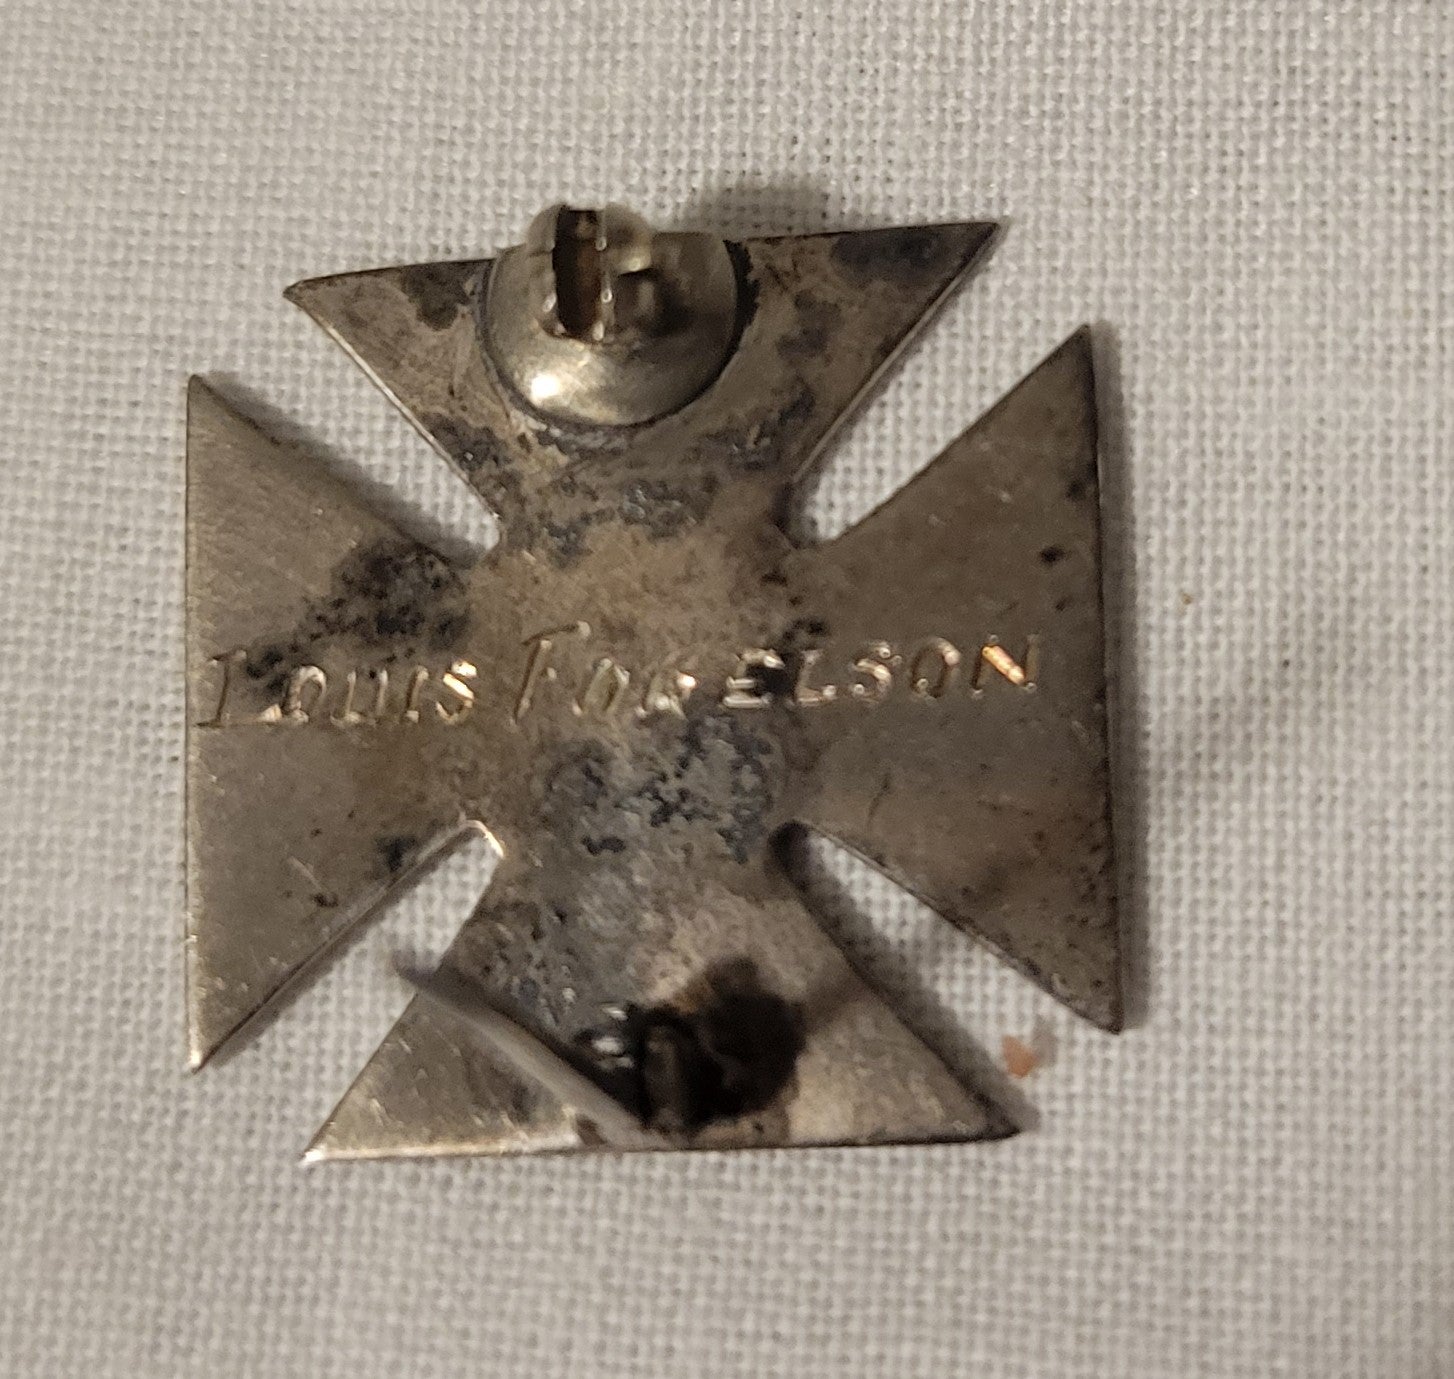 An antique Sunday School cross pin, with "Our Savior" engraved on the front of it. On the back, the name "Louis Fogelson" is engraved. Back view.